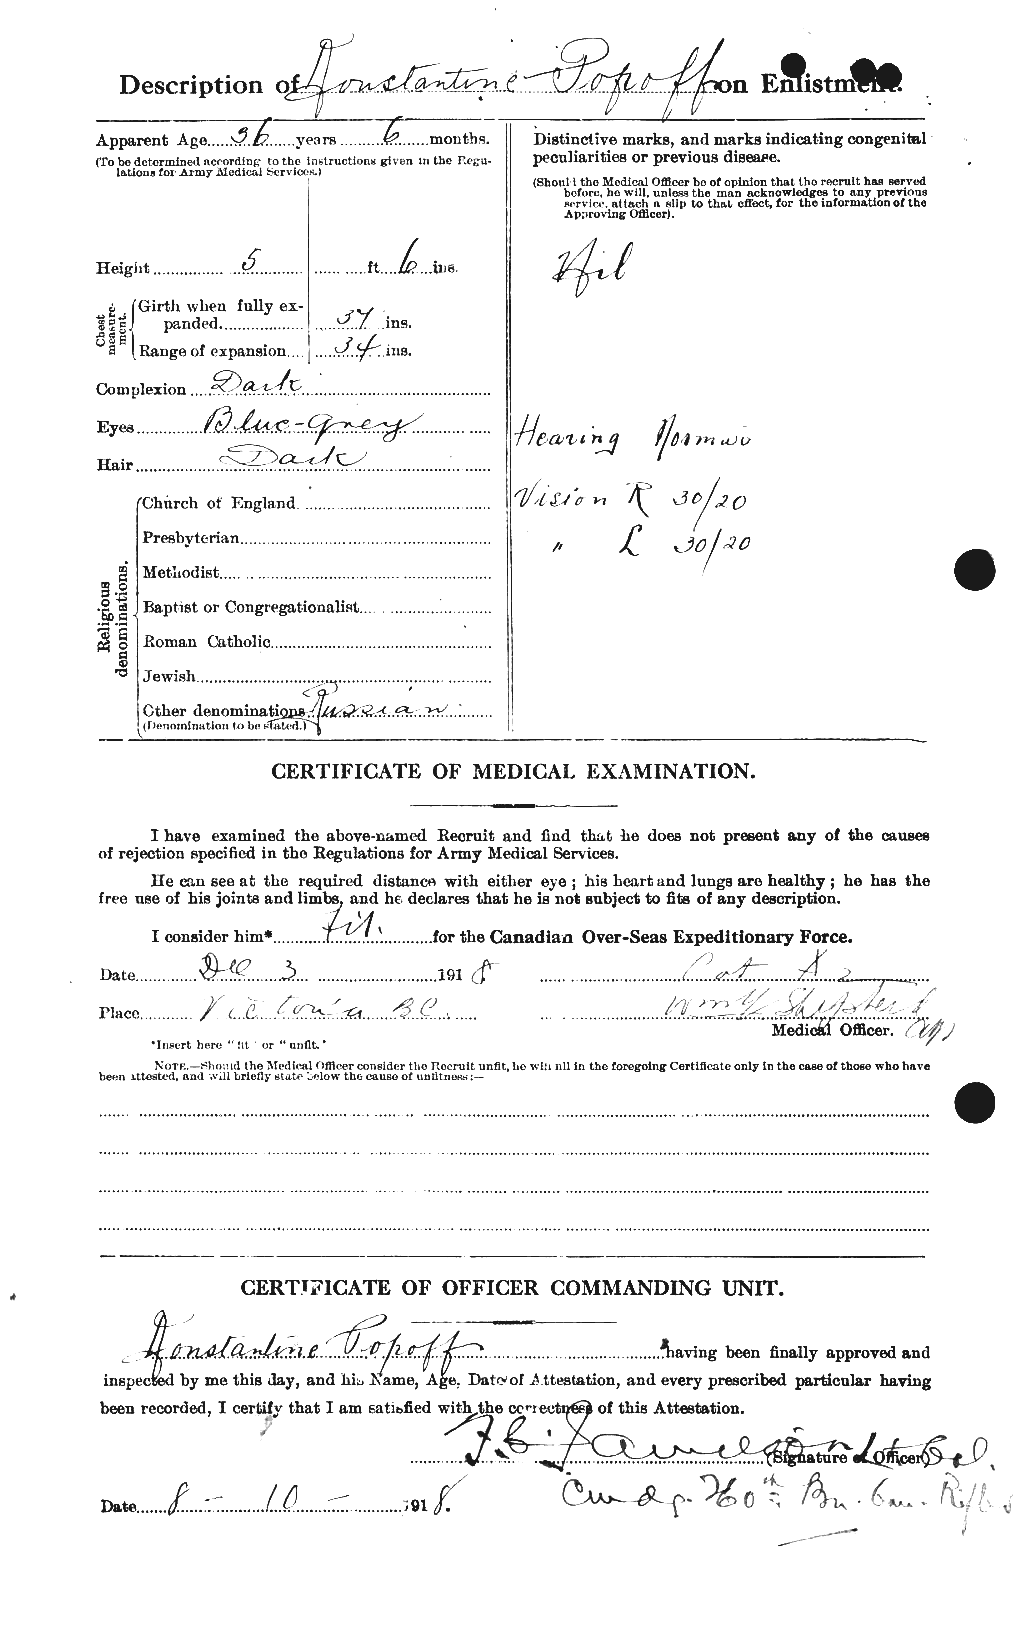 Personnel Records of the First World War - CEF 581591b